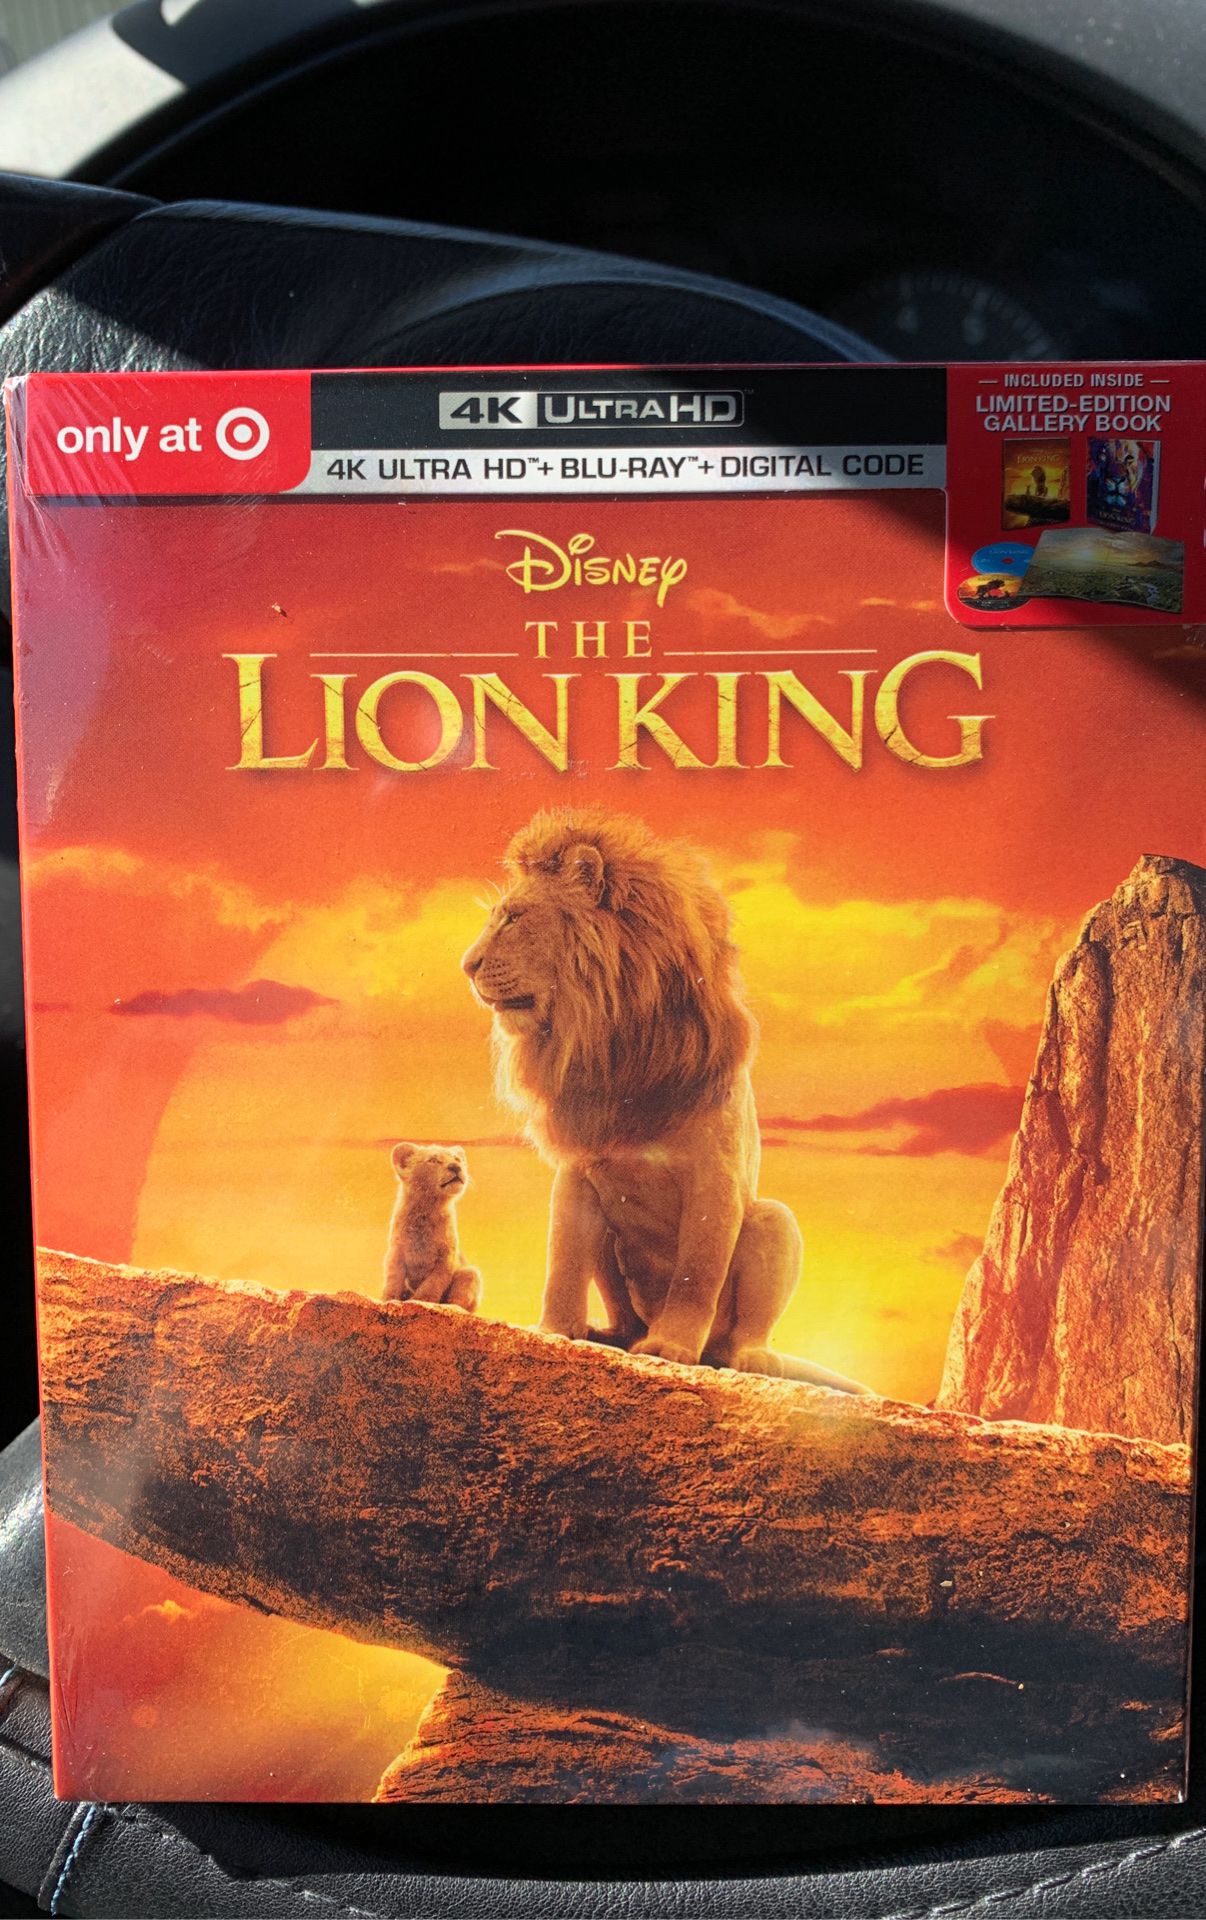 The lion king 4K target exclusive